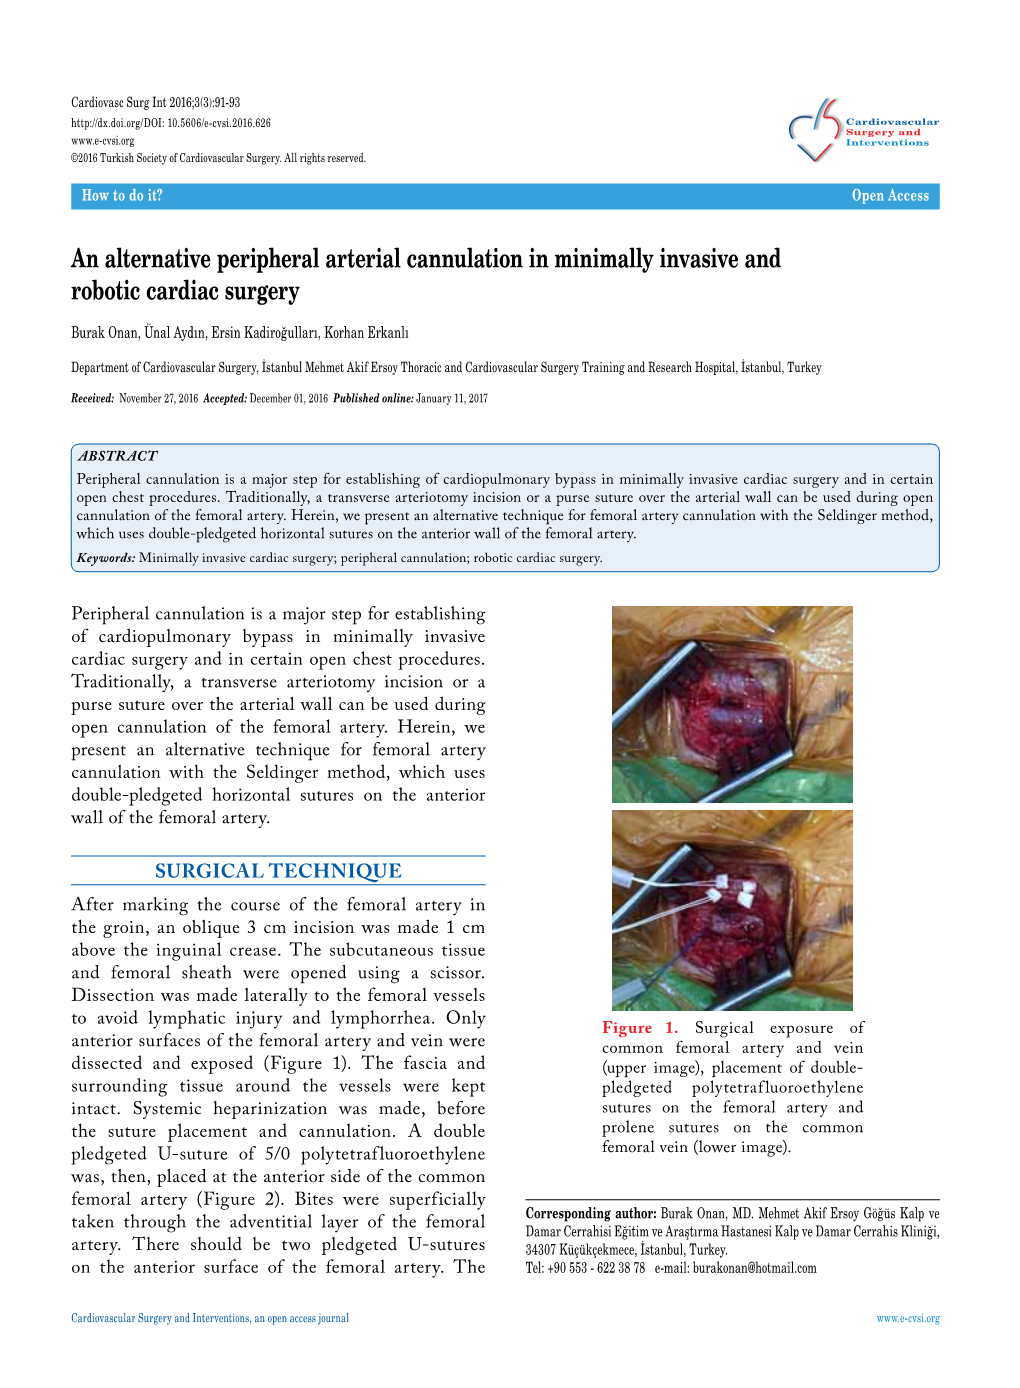 An Alternative Peripheral Arterial Cannulation in Minimally Invasive and Robotic Cardiac Surgery